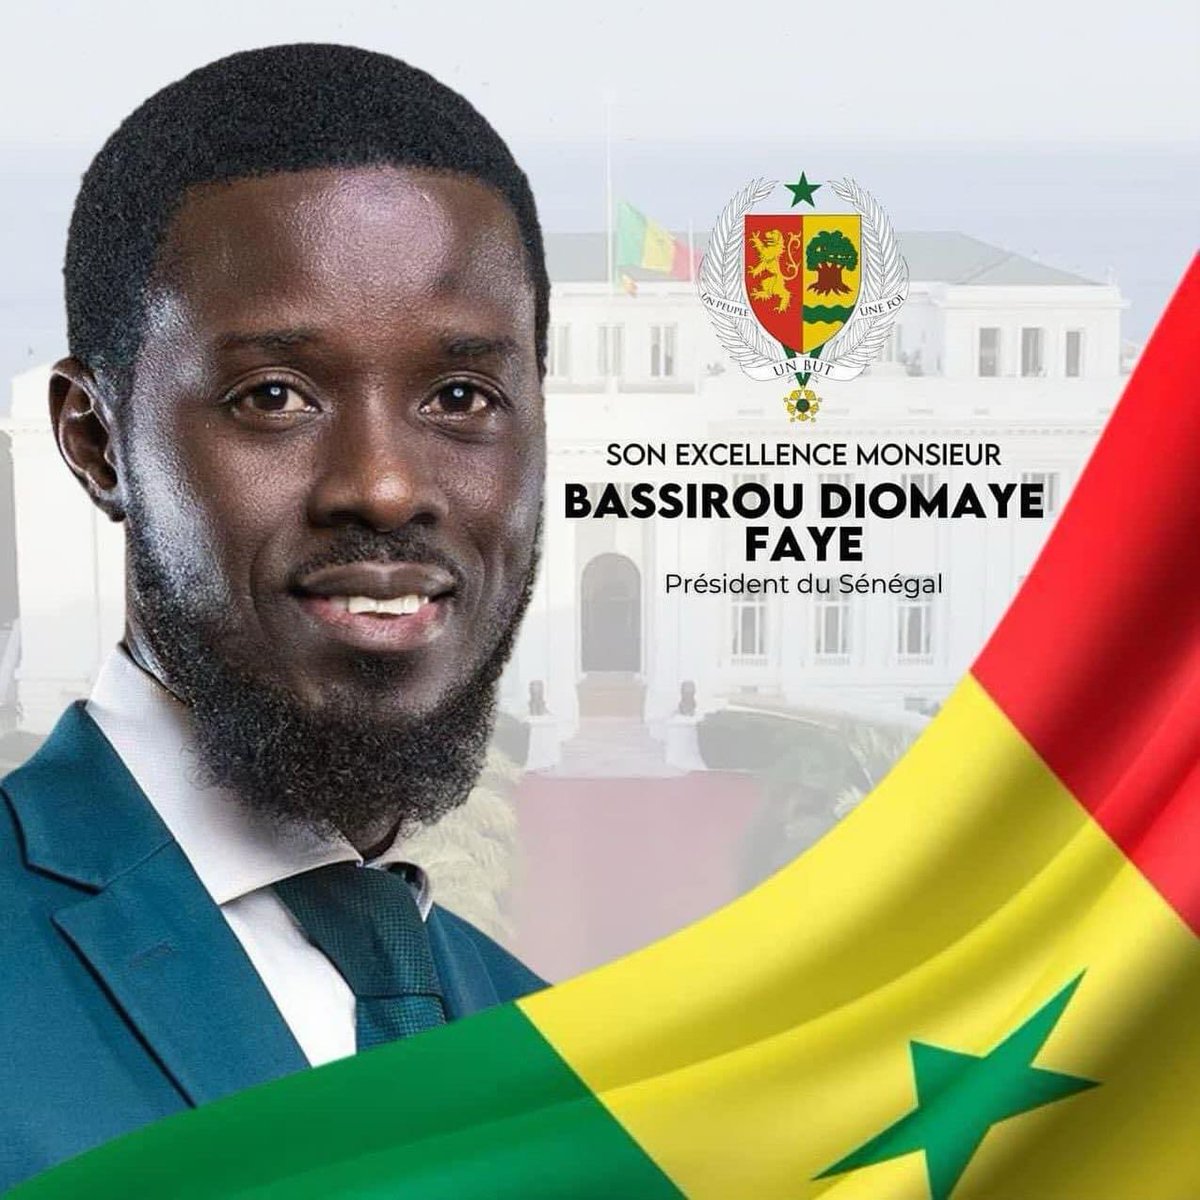 Opposition triumph over a vicious autocracy in Senegal epitomises the supremacy of people power. With a common front, kisoboka. Congratulations to Comrade Bassirou @DiomayeFaye upon your election as President of Senegal.